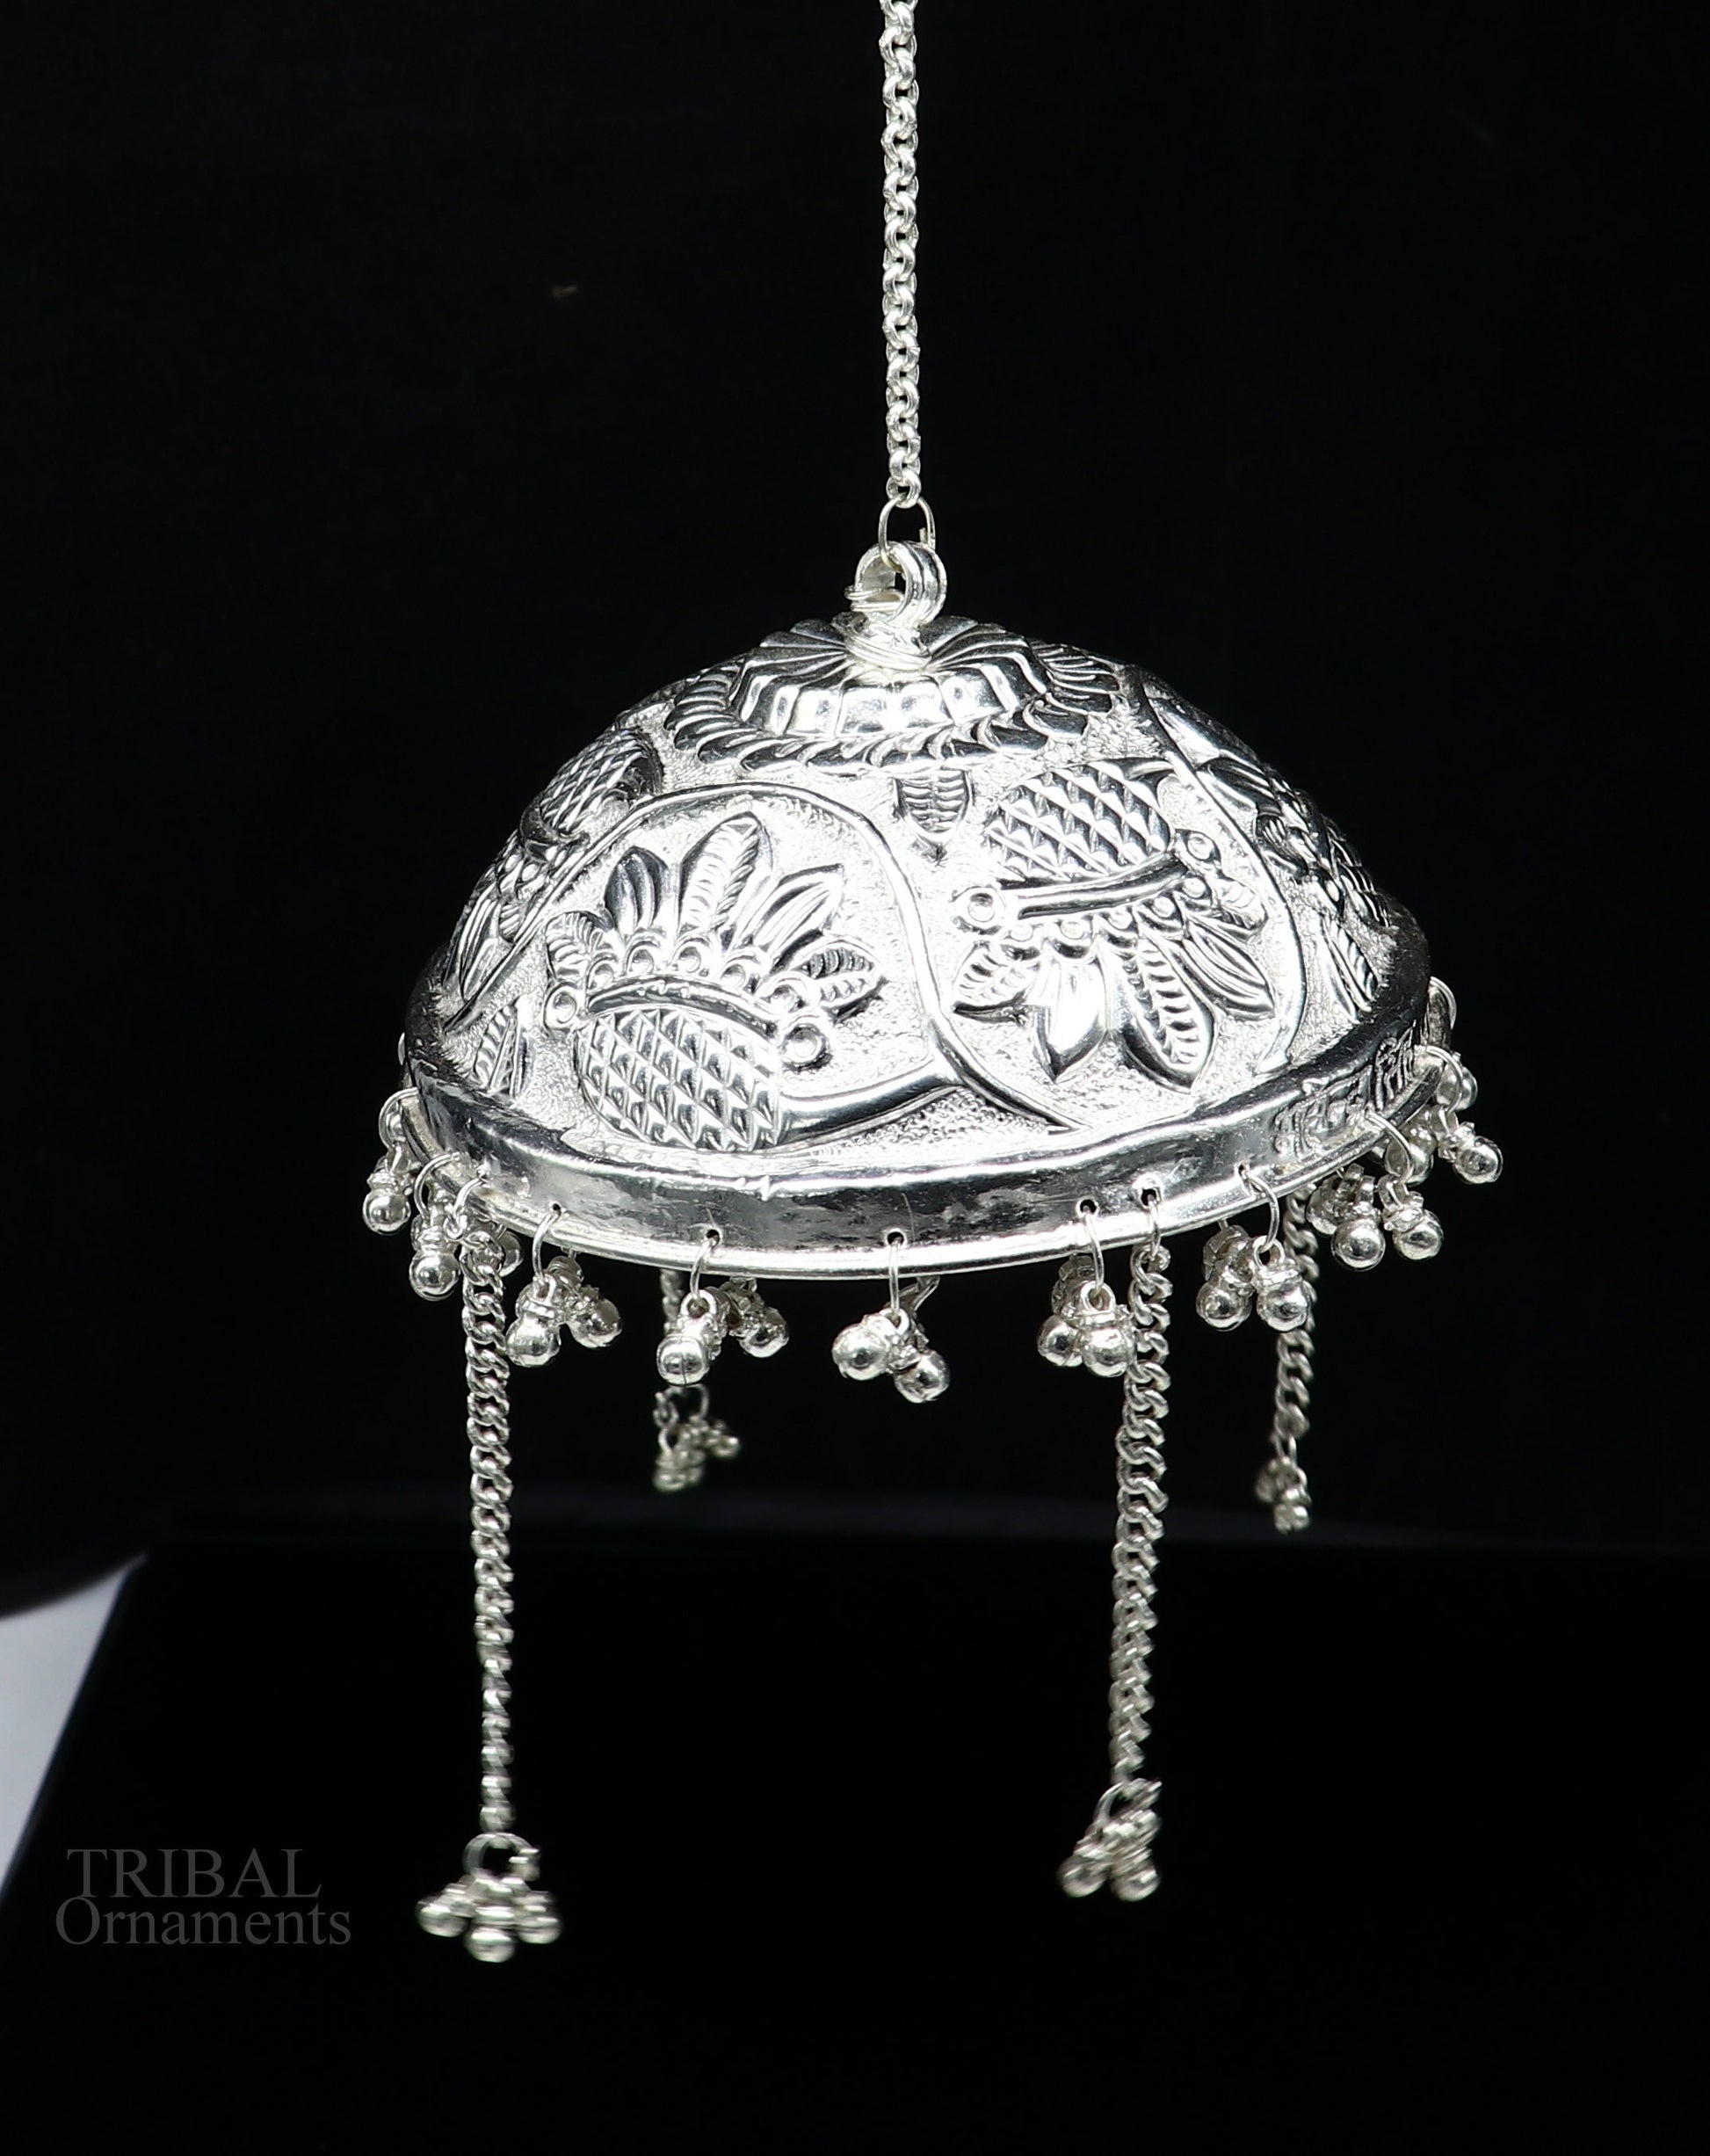 Handmade Solid Silver nakshi work chattar or chhatra, silver umbrella god temple art, sterling silver article, temple utensils su635 - TRIBAL ORNAMENTS